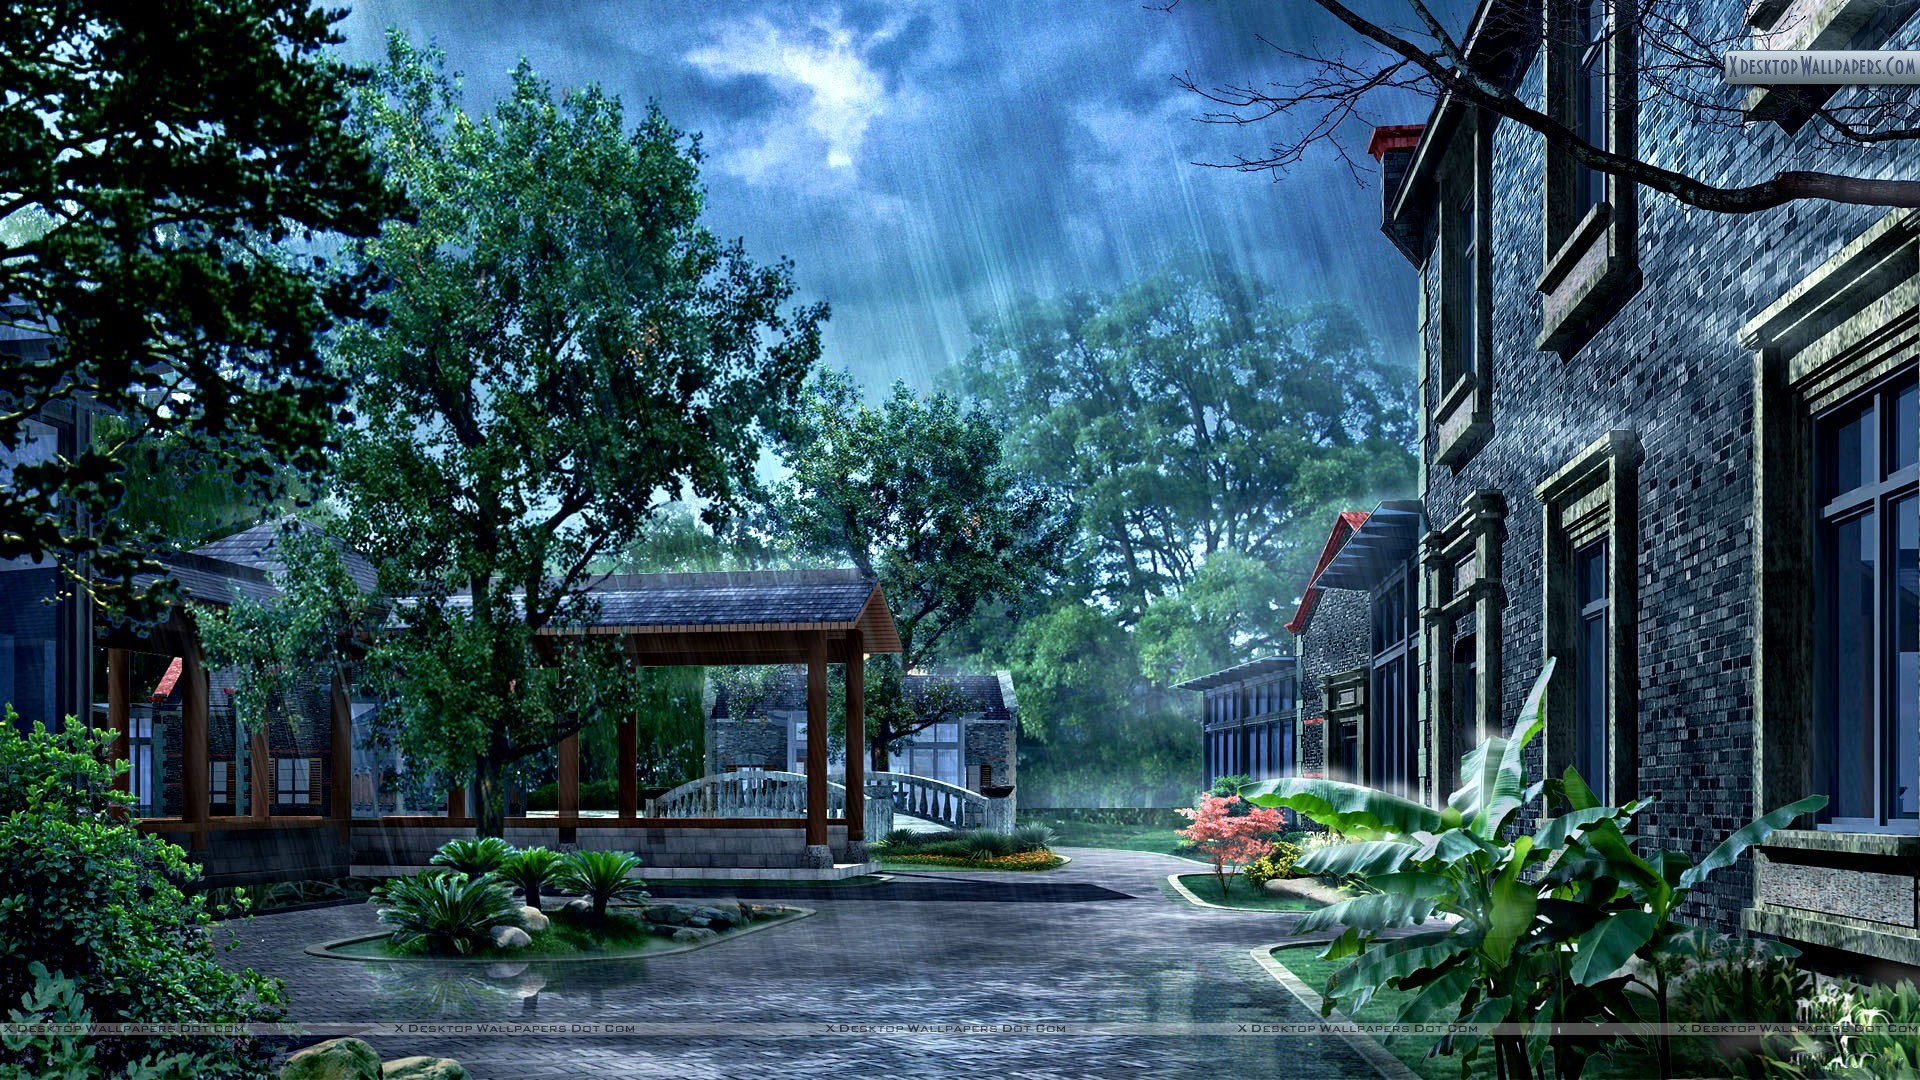 1920x1080 Explore Rain Pictures, Wallpaper Backgrounds, and more!